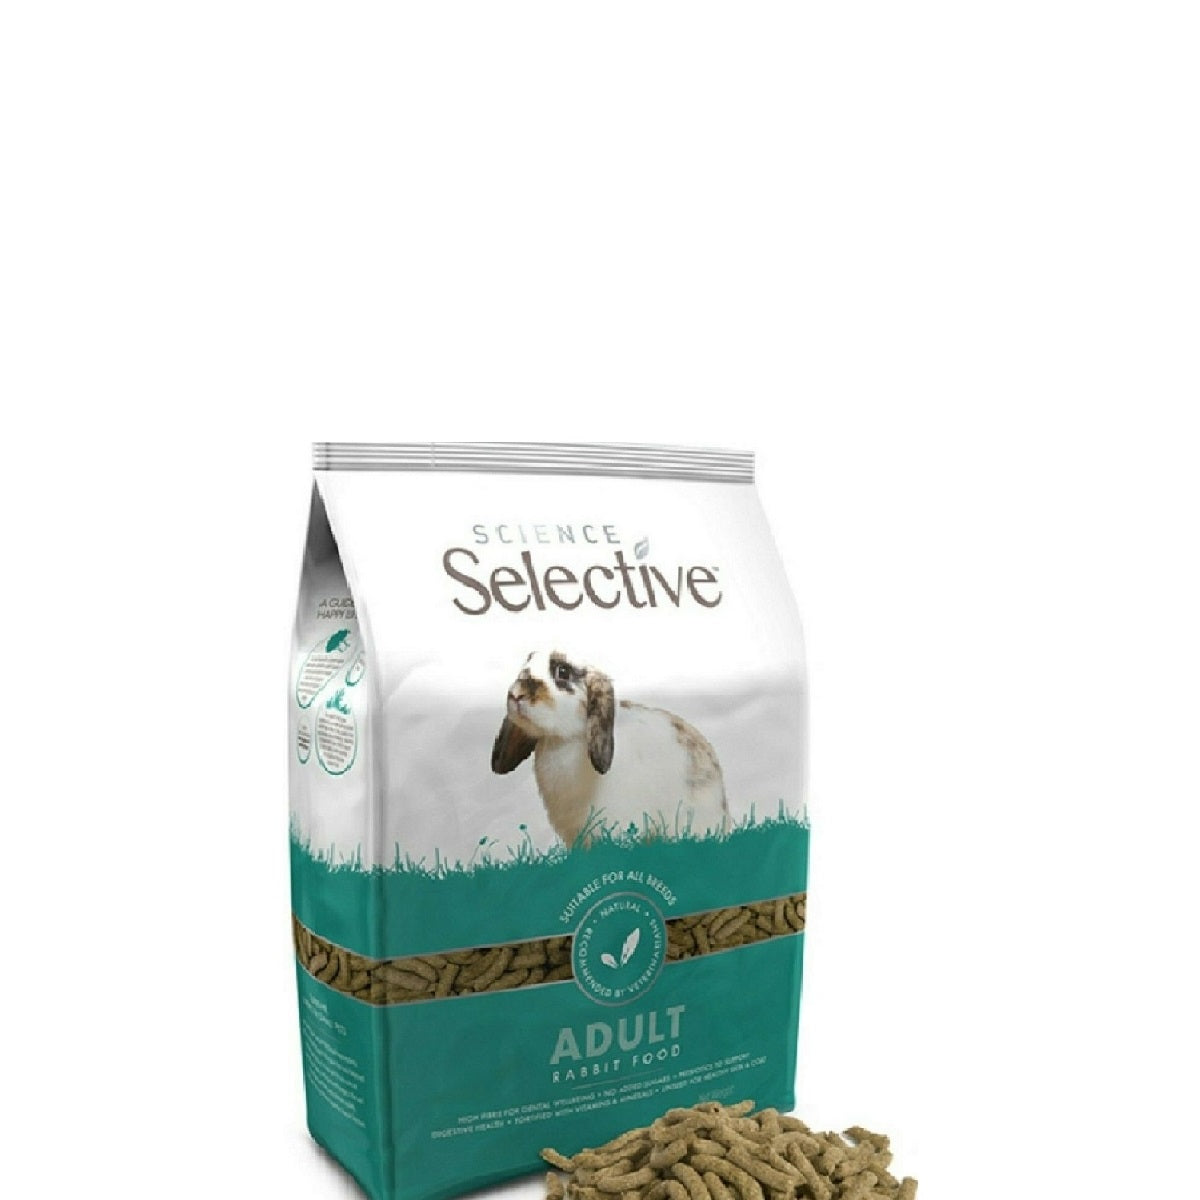 Science Selective - Adult Rabbit Food